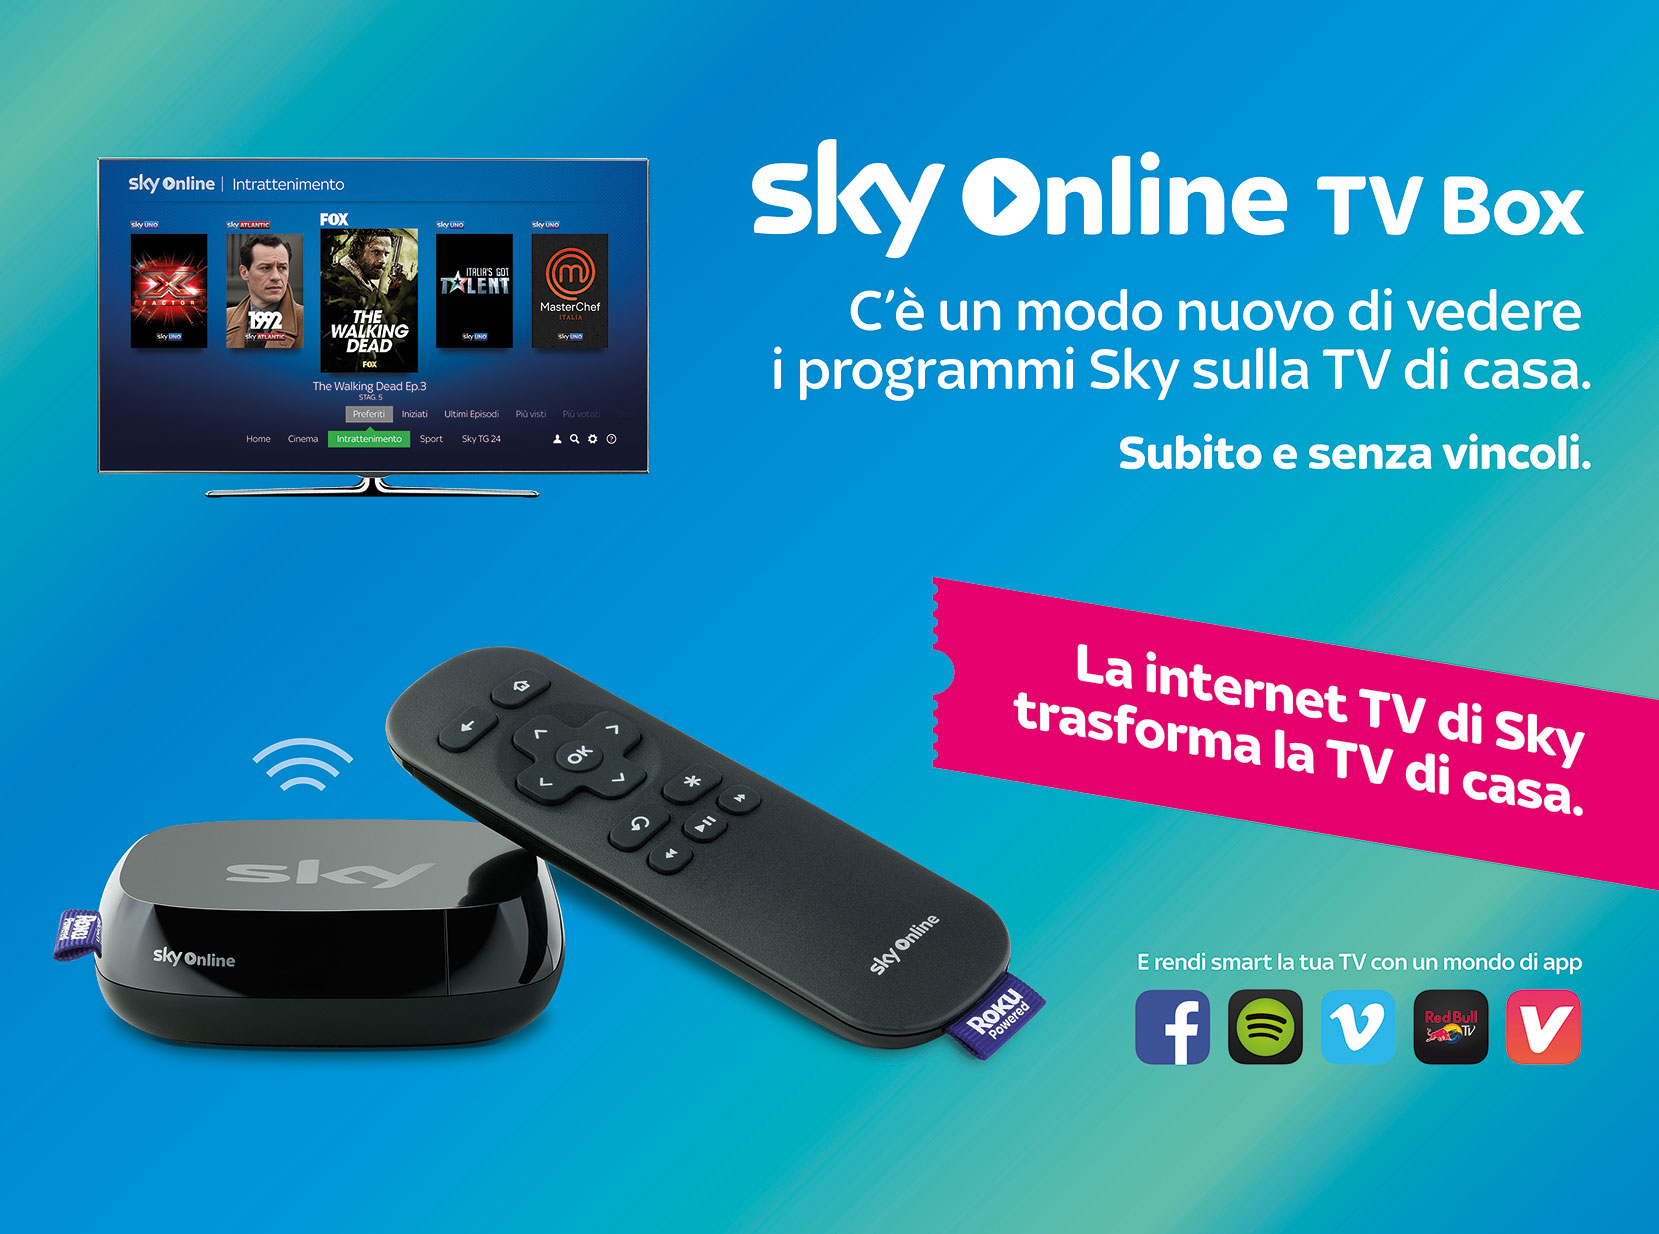 Sky launches the Roku Powered Sky Online TV Box in Italy